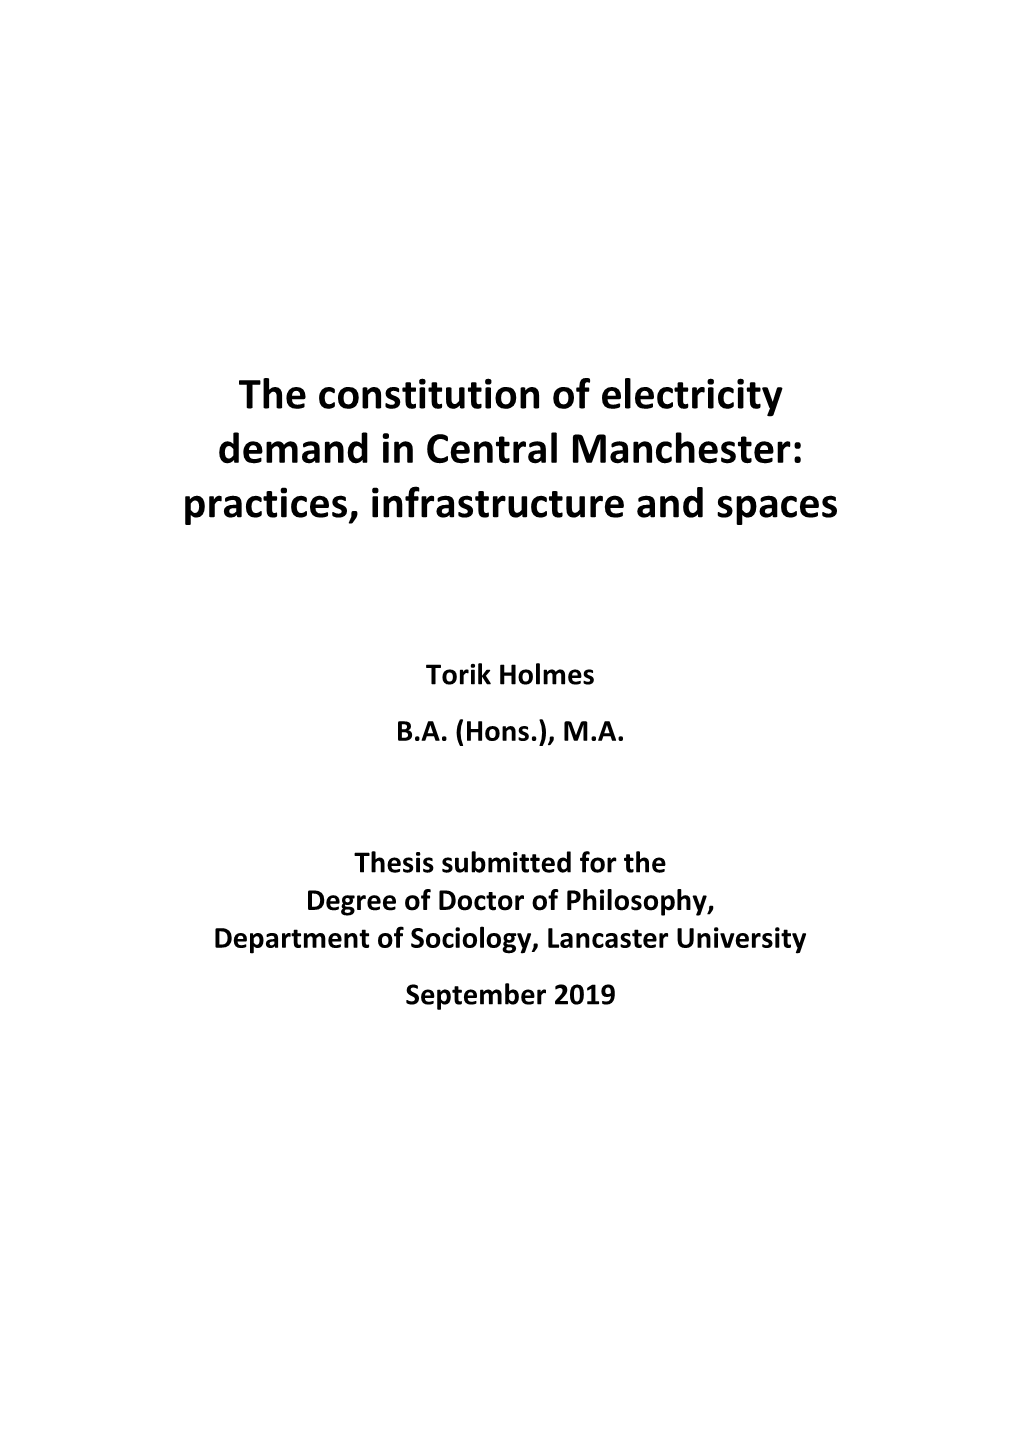 The Constitution of Electricity Demand in Central Manchester: Practices, Infrastructure and Spaces